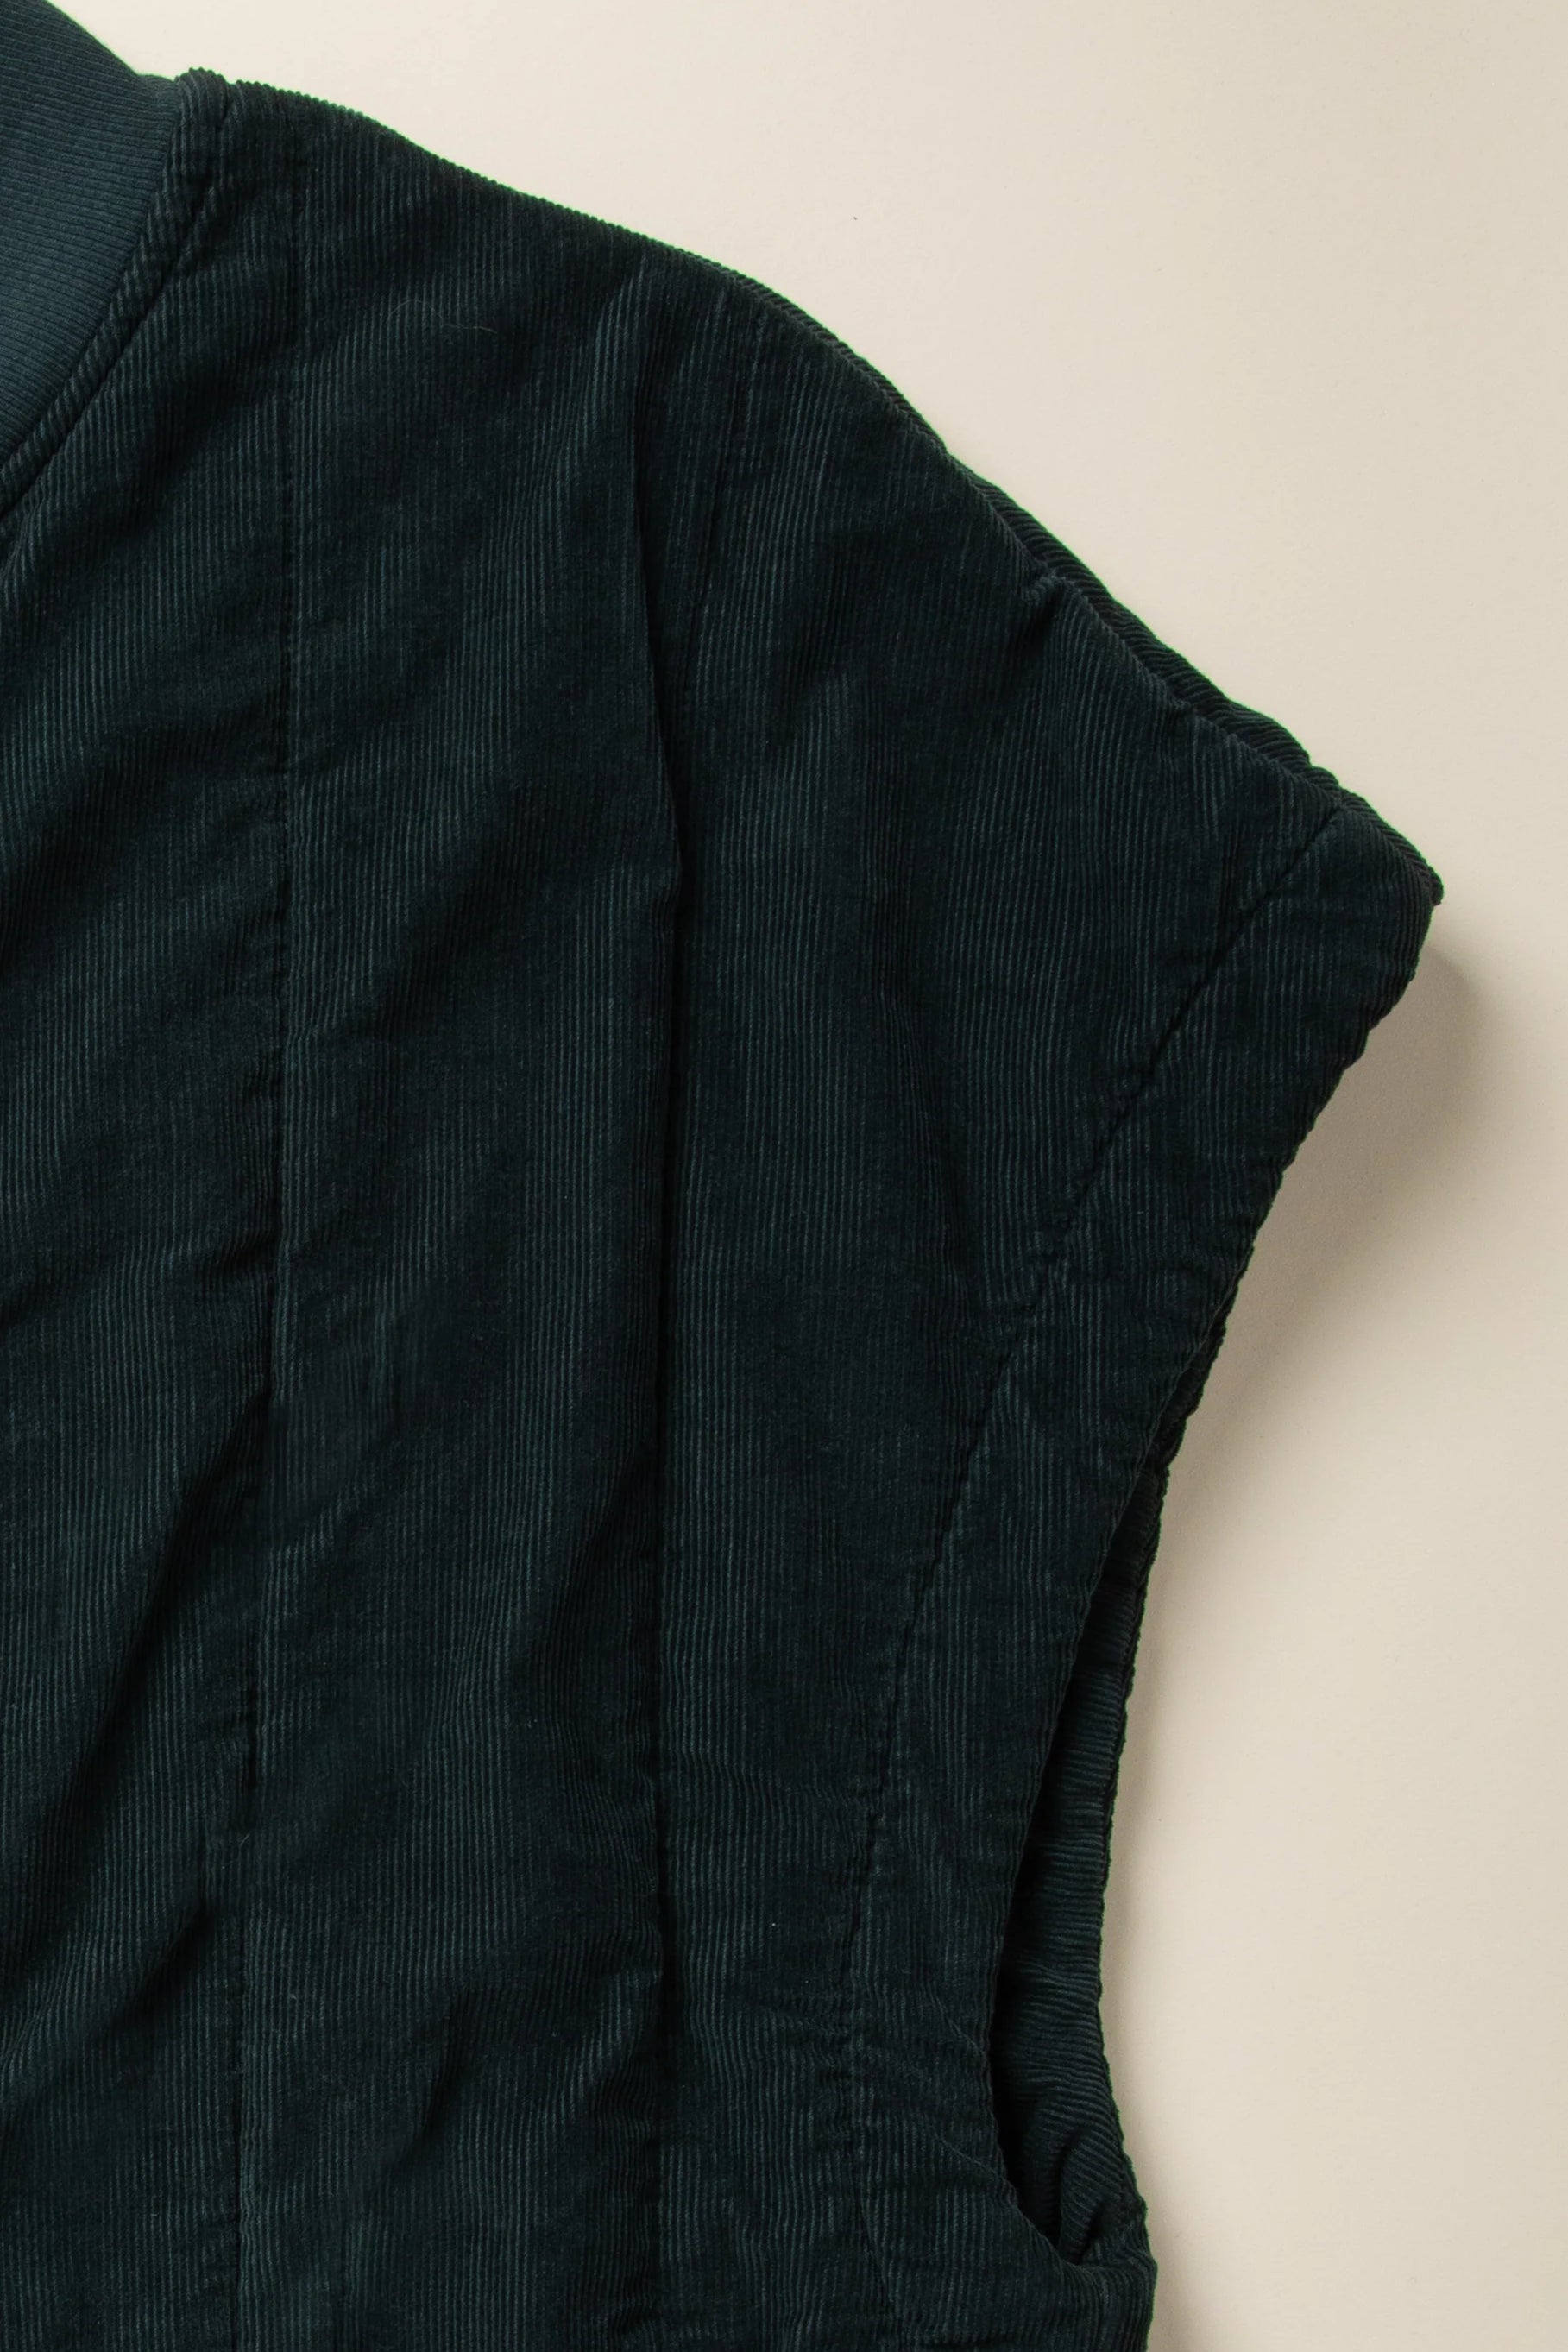 PRAIRIE UNDERGROUND _ Made in USA Sustainable Clothing Collections - COLT Corduroy Snap Front Vest in Galaxy Green